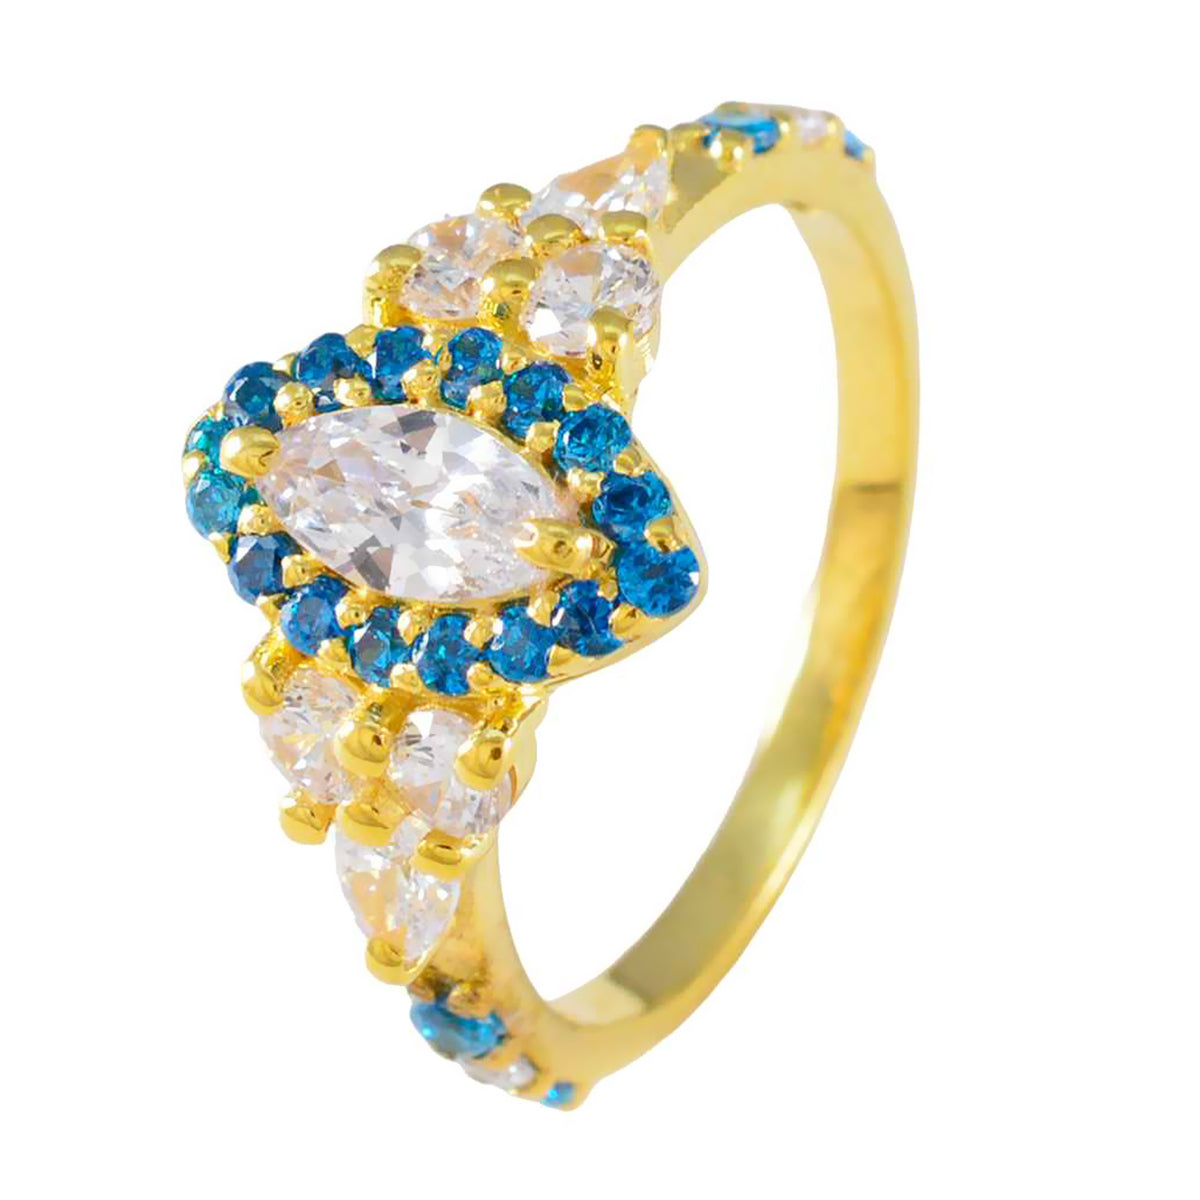 Riyo Attractive Silver Ring With Yellow Gold Plating Blue Topaz CZ Stone Marquise Shape Prong Setting Bridal Jewelry Anniversary Ring